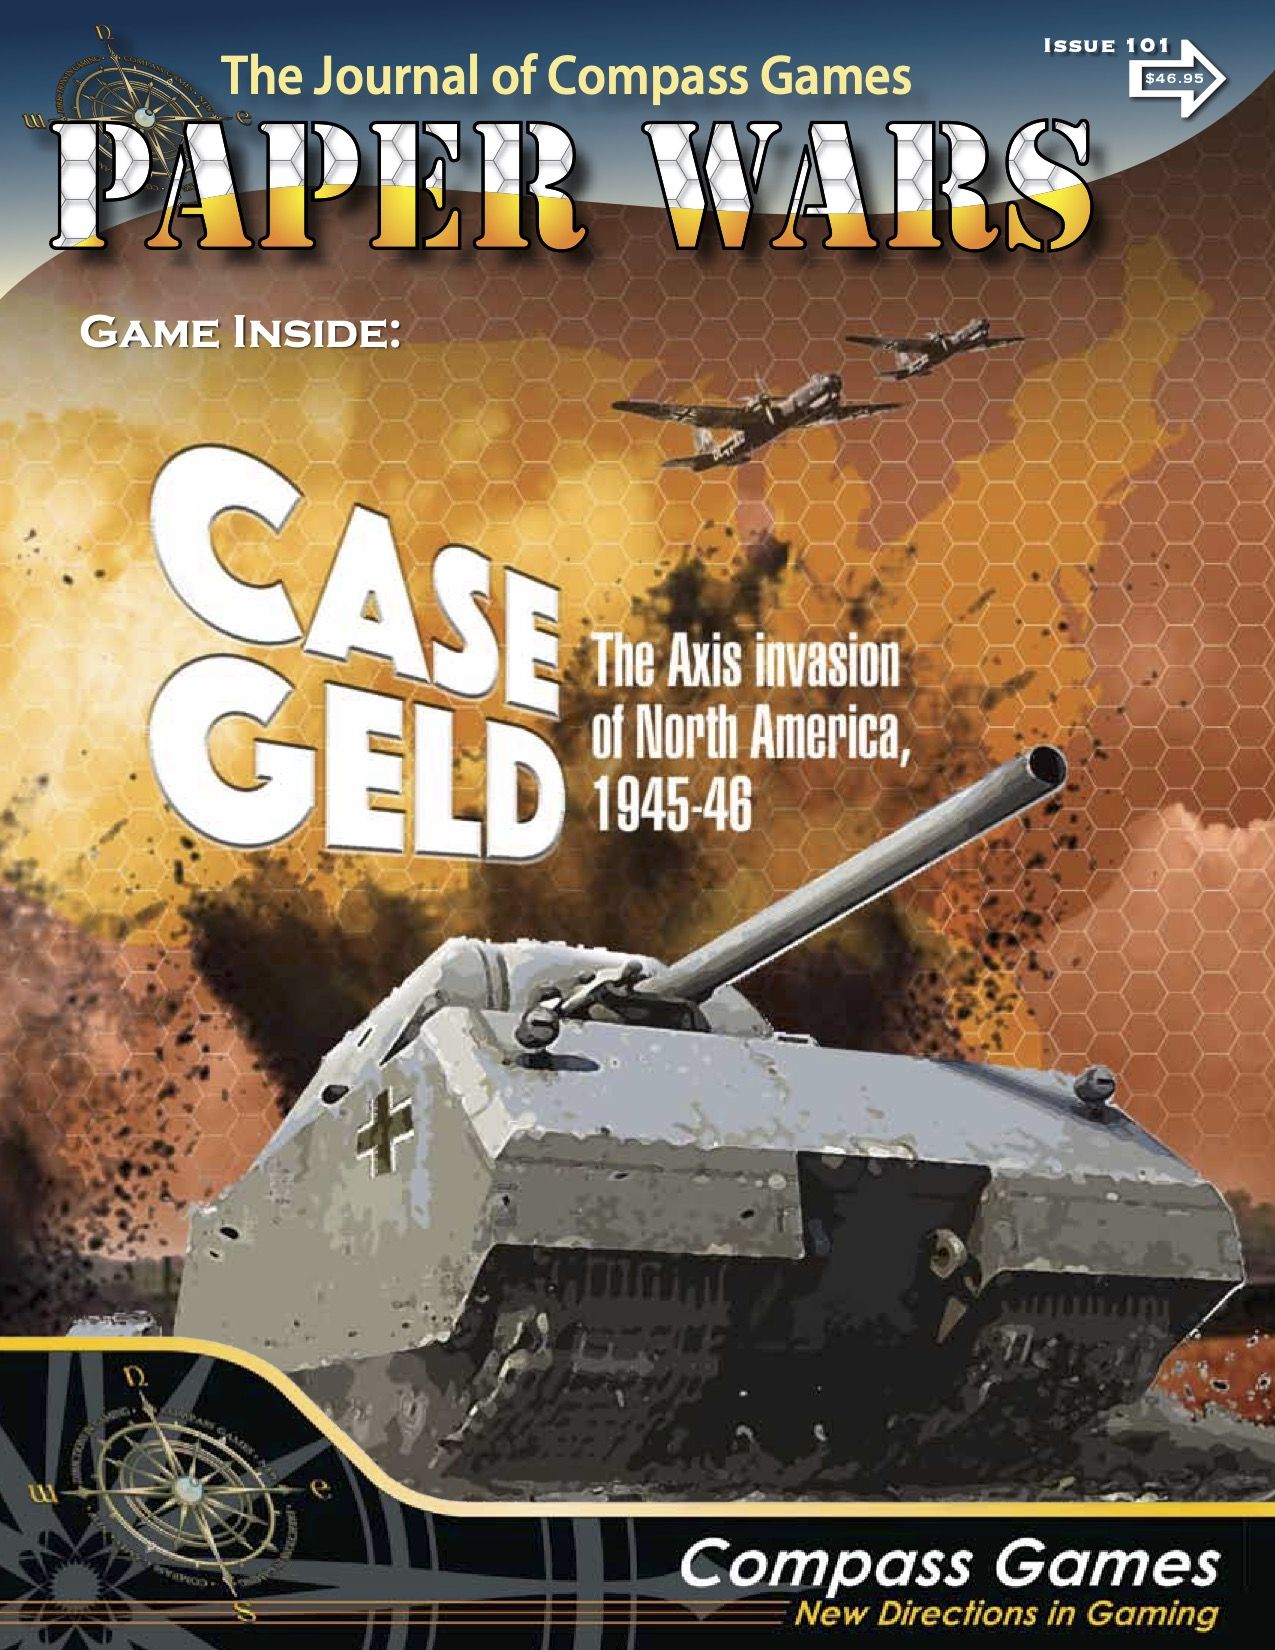 Case Geld: The Axis Invasion of North America, 1945-46